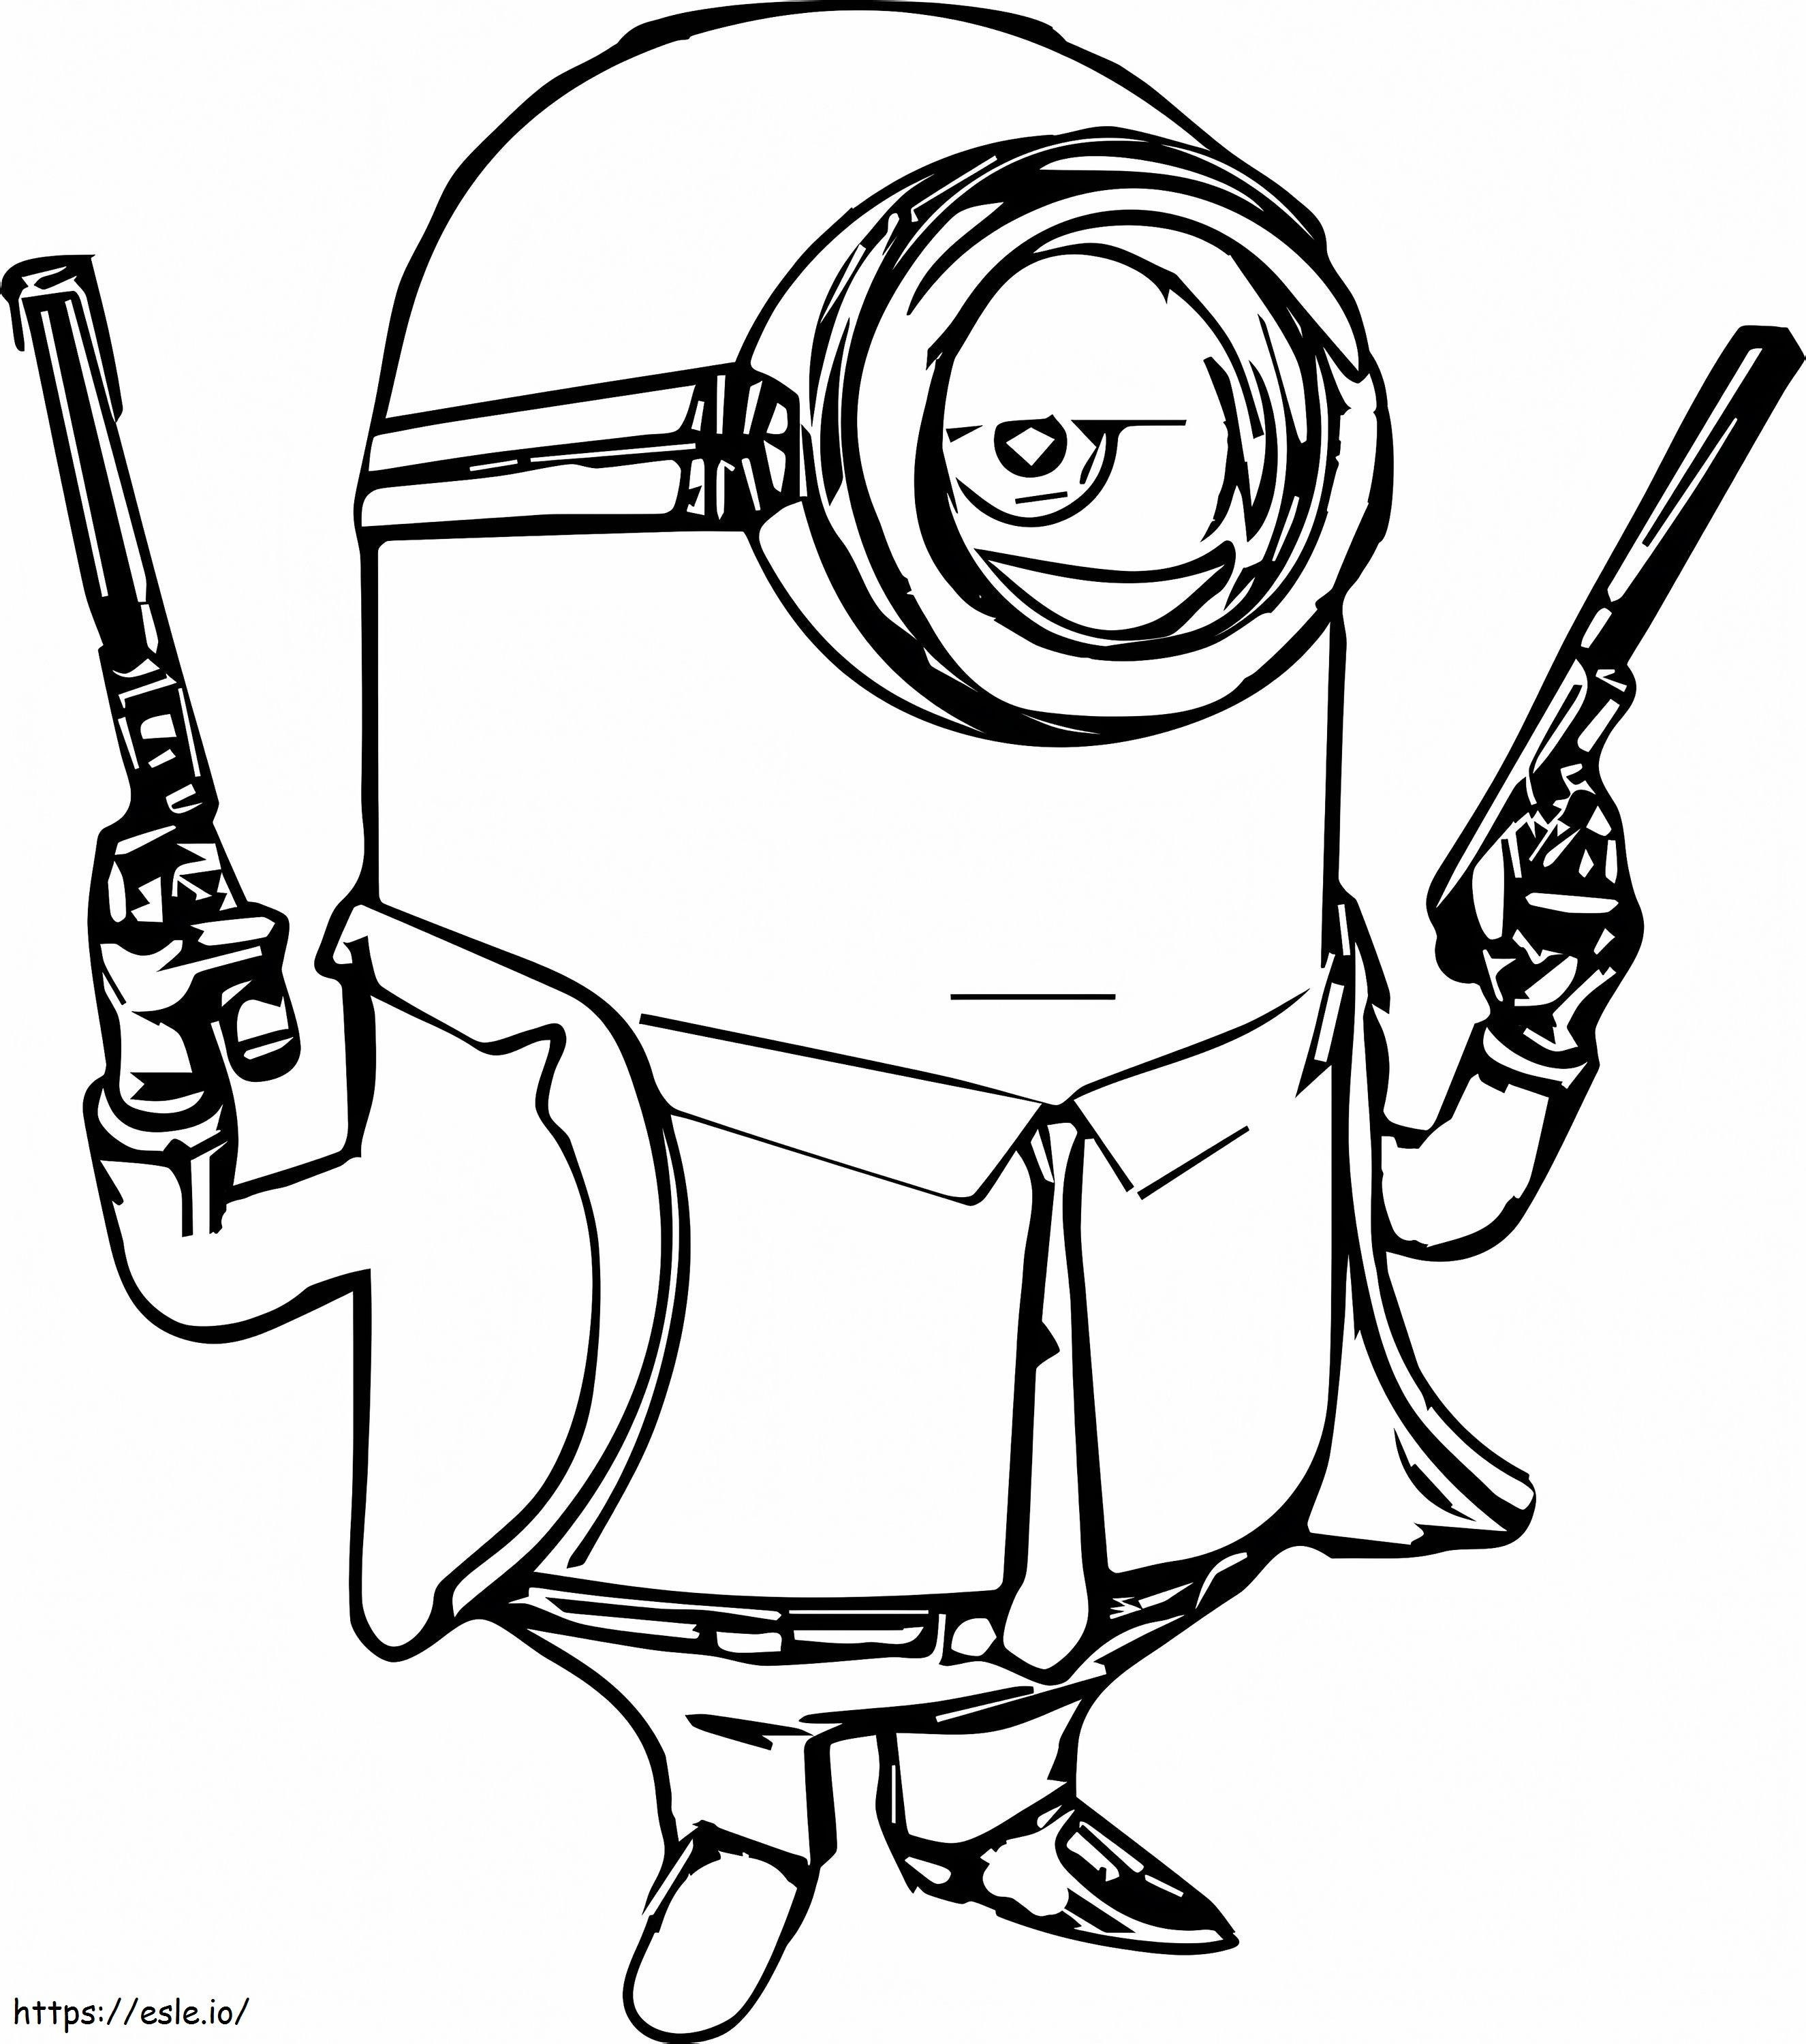 1531712893 Agent Minion A4 coloring page